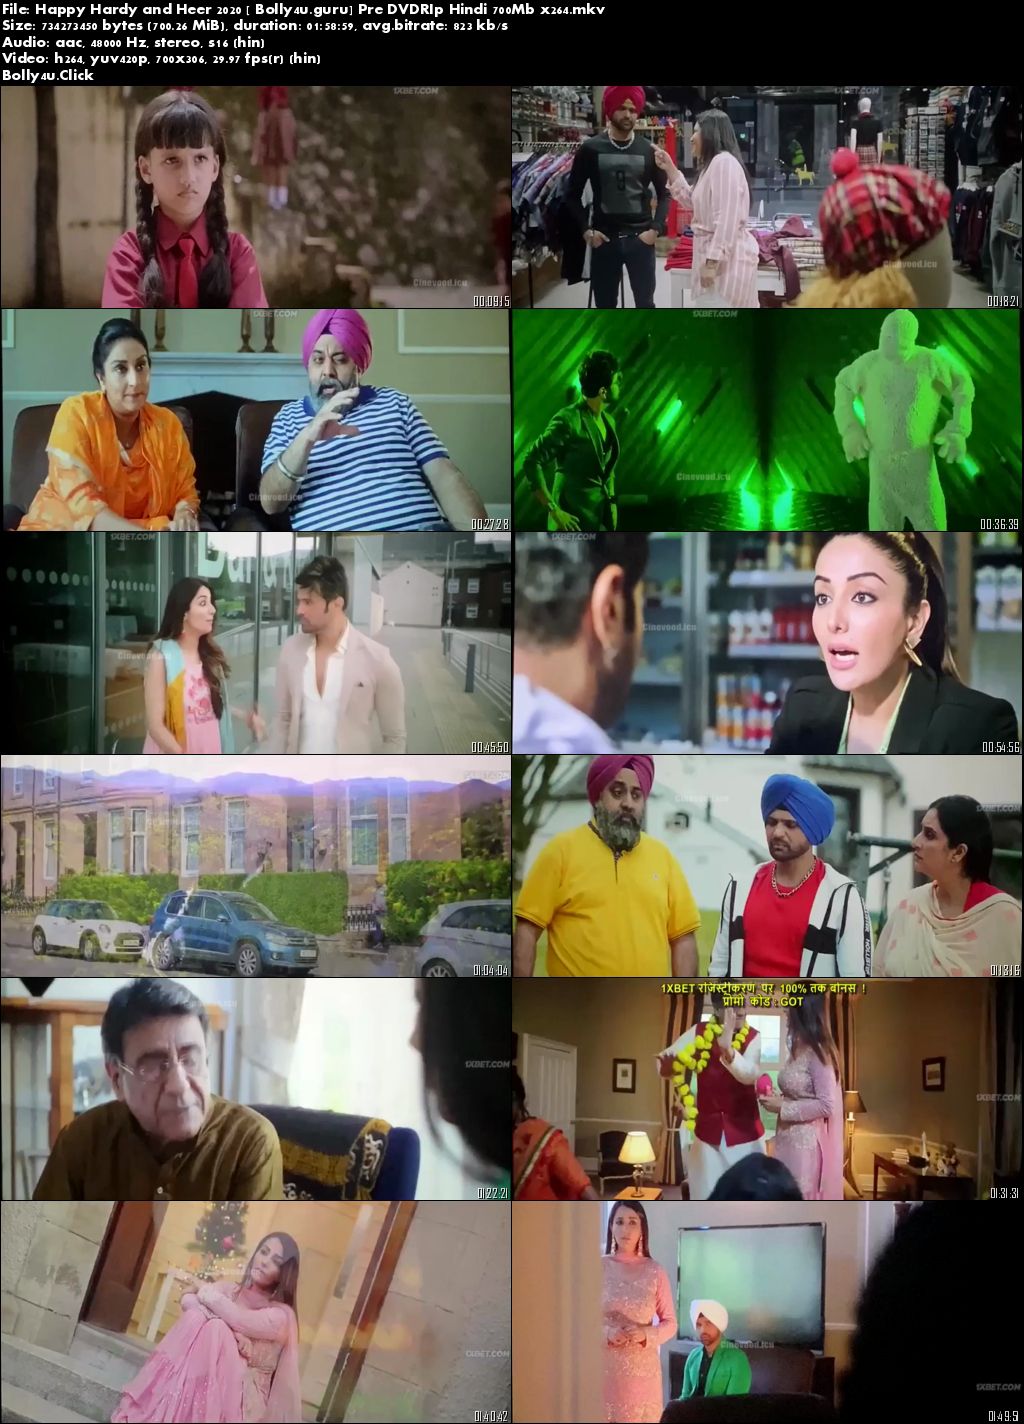 Happy Hardy and Heer 2020 Pre DVDRip 700Mb Hindi x264 Download